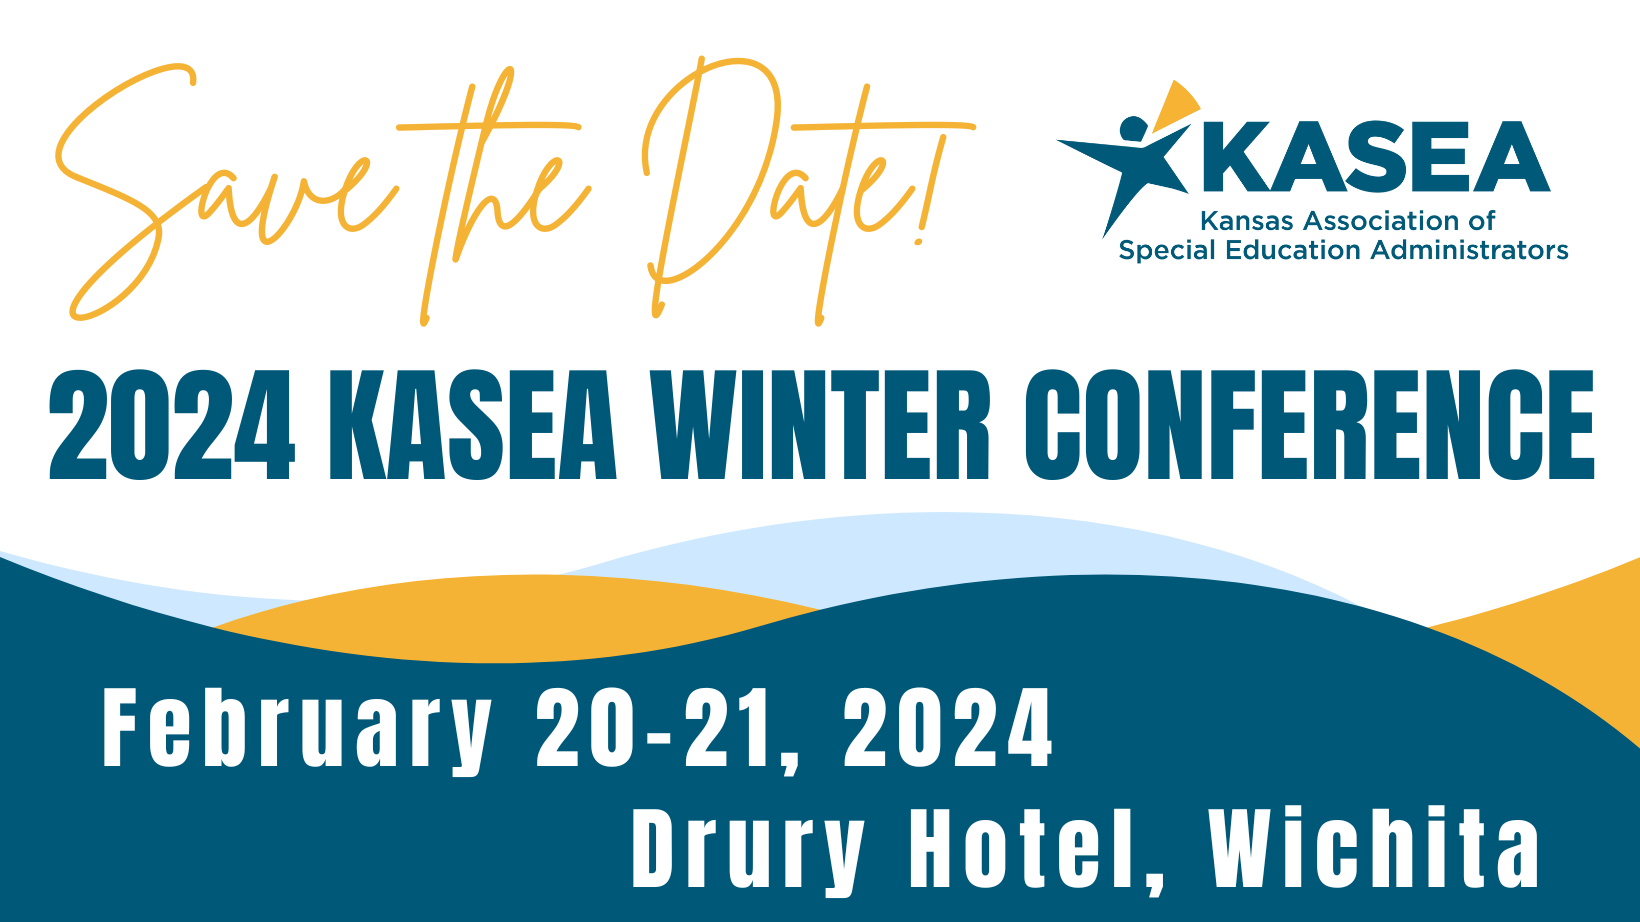 Save the Date - 2024 KASEA Winter Conference - February 20-21, 2024